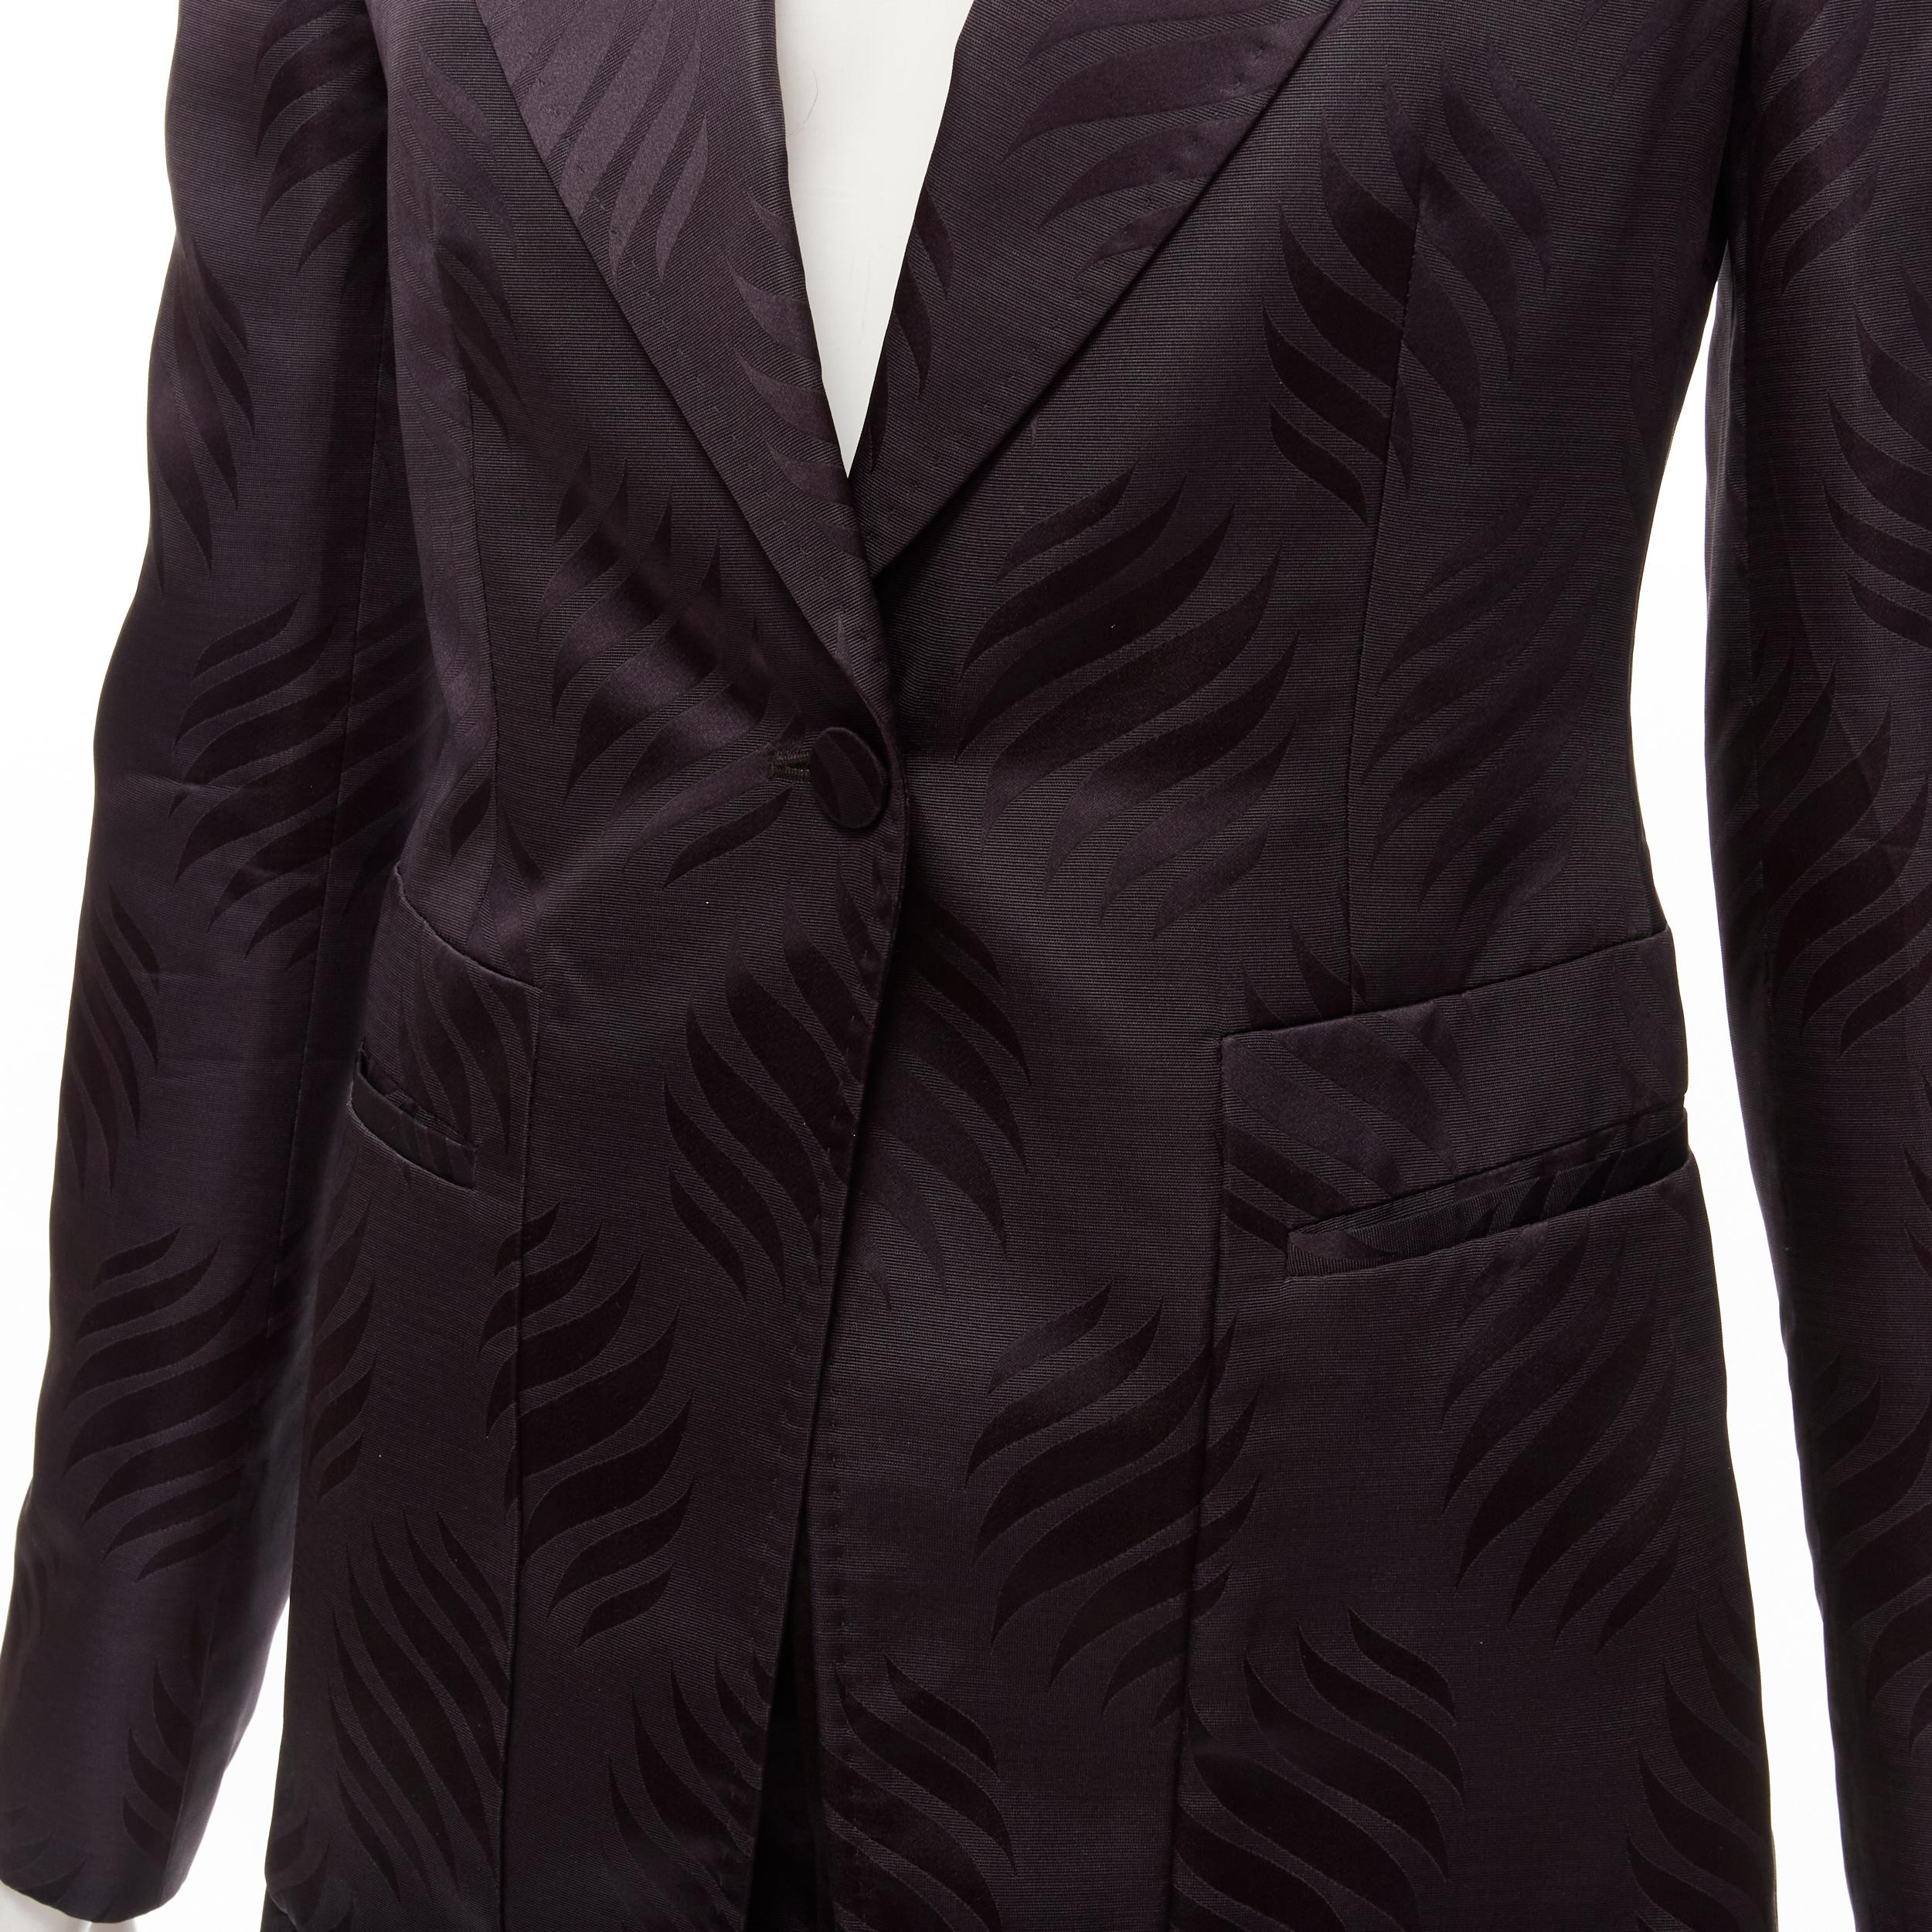 GUCCI Tom Ford Vintage black oriental leaf jacquard blazer skirt suit IT38 XS
Reference: TGAS/C01853
Brand: Gucci
Designer: Tom Ford
Material: Silk
Color: Purple
Pattern: Abstract
Closure: Button
Lining: Black Silk
Extra Details: Matching fabric